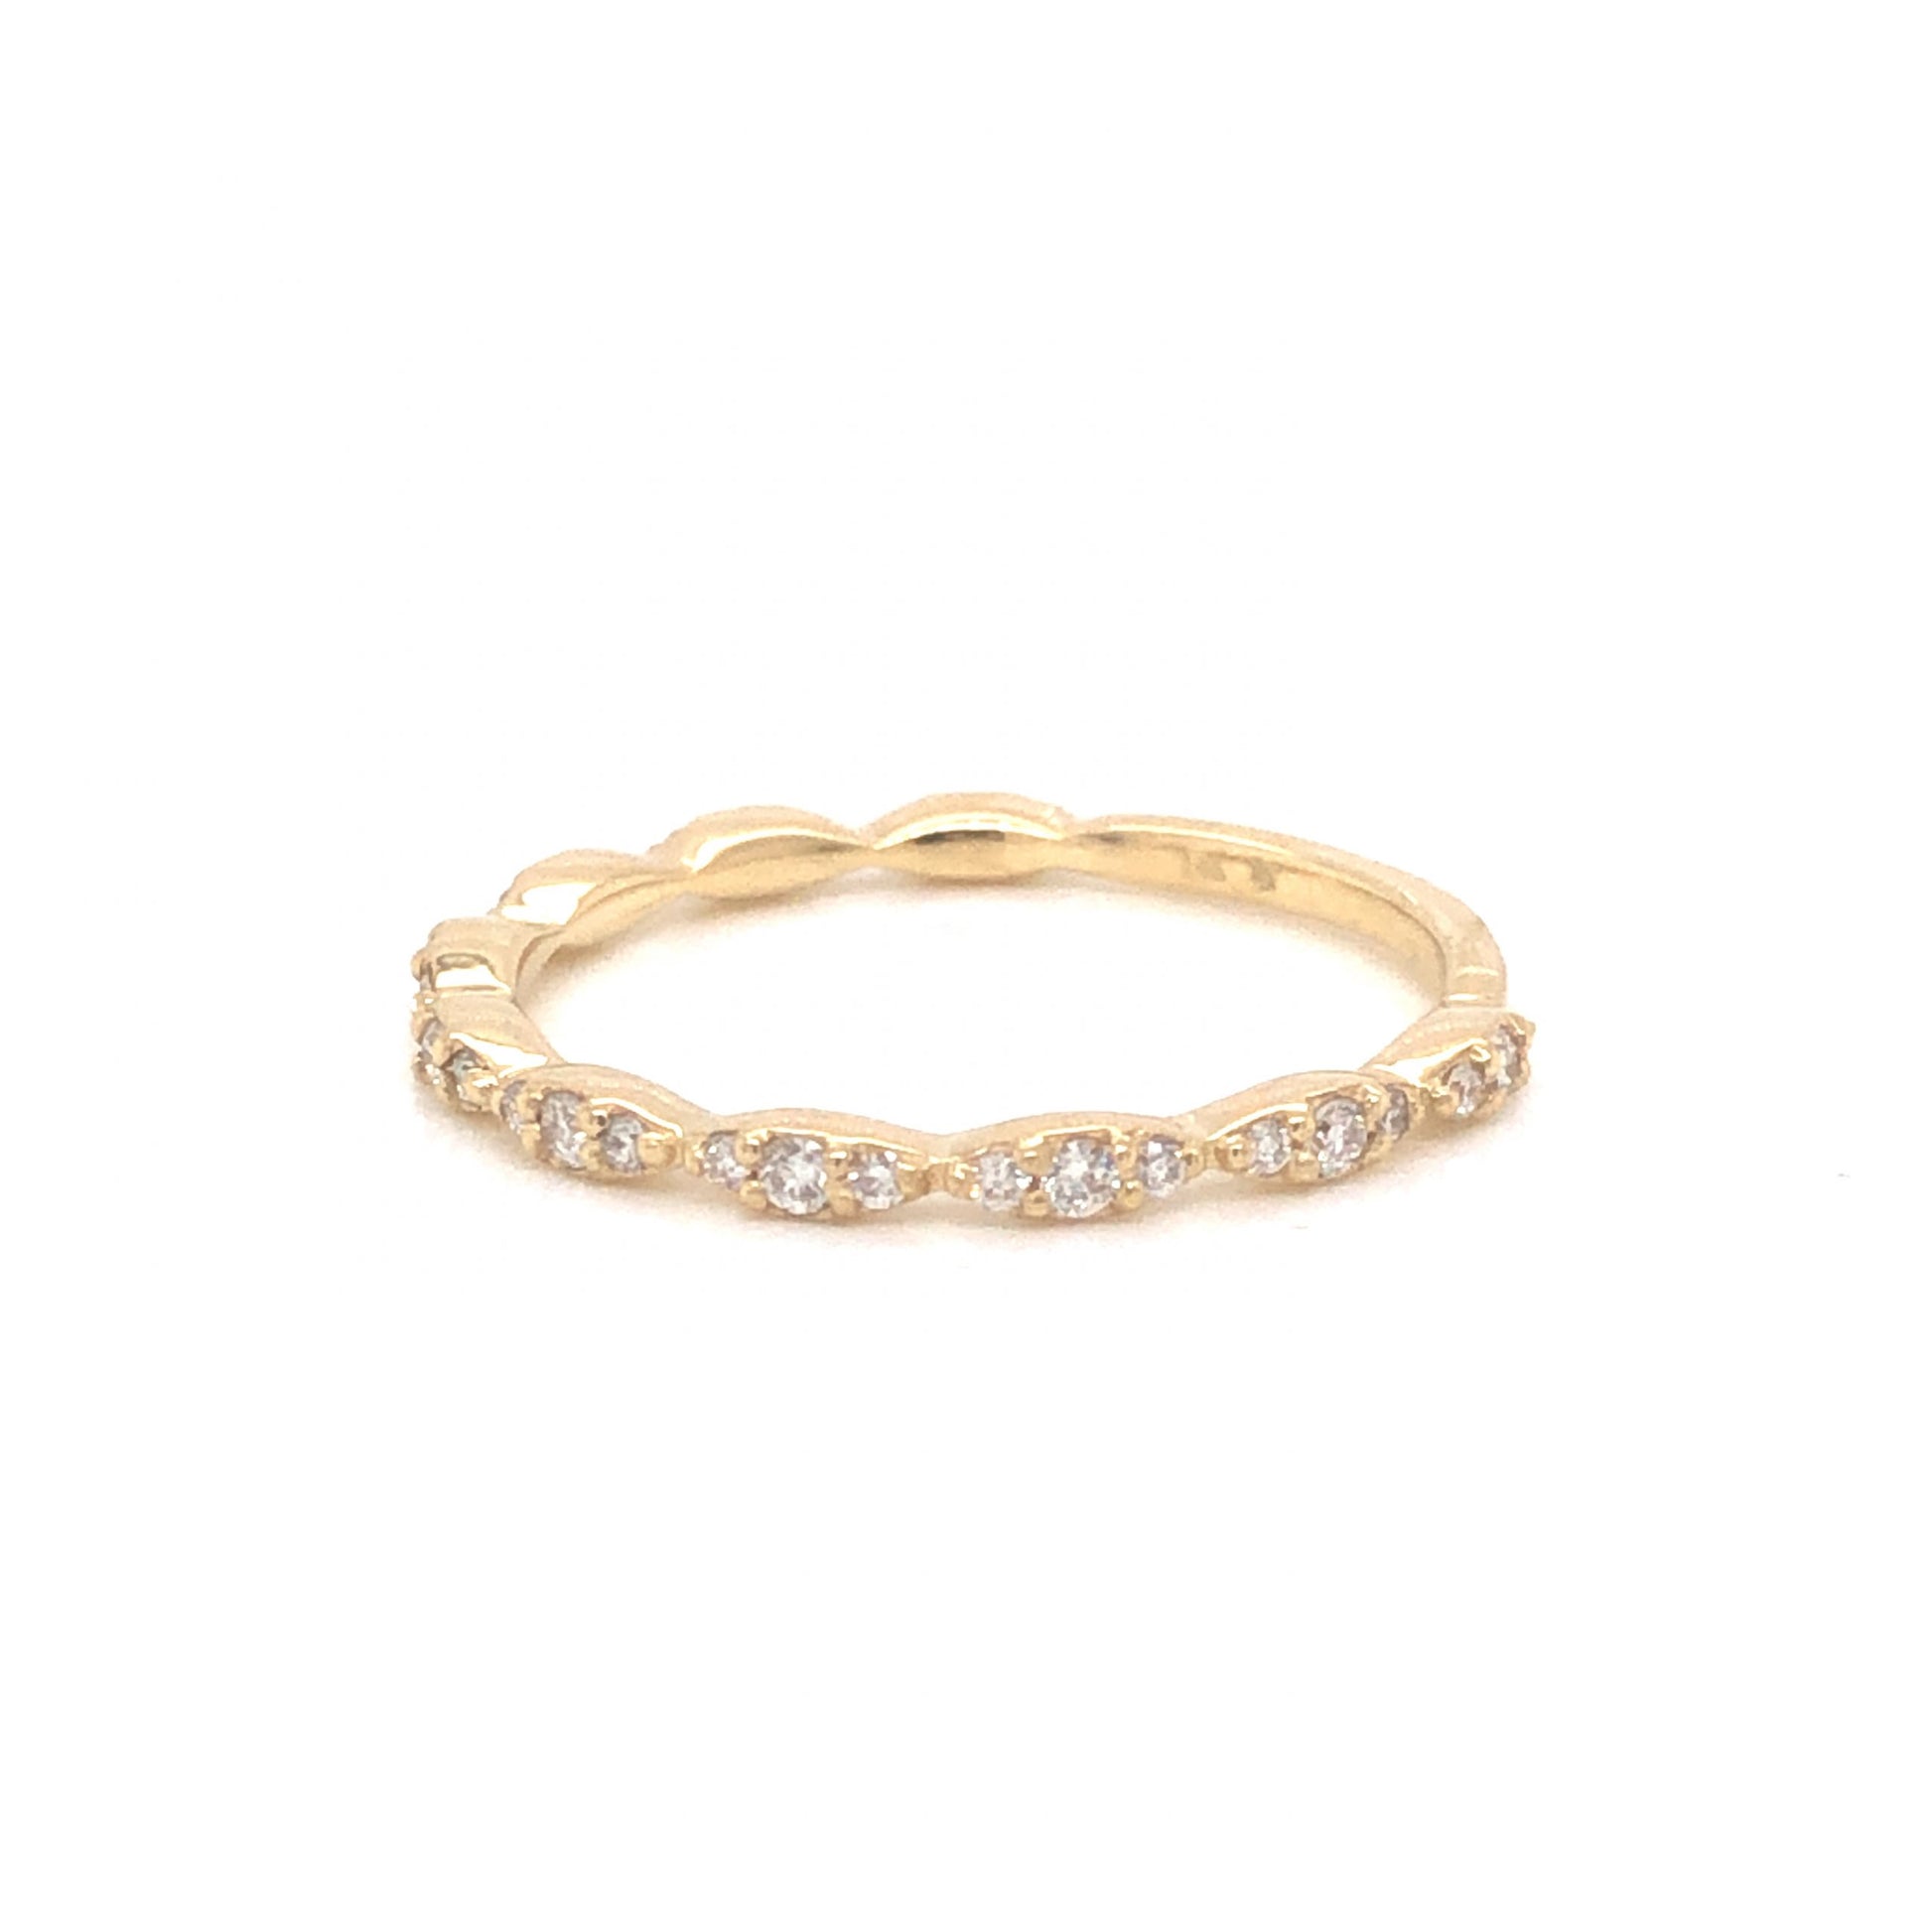 Thin .24 Half-Eternity Diamond Wedding Band in 14k Yellow GoldComposition: Platinum Ring Size: 6.5 Total Diamond Weight: .24ct Total Gram Weight: 1.2 g Inscription: 14k
      